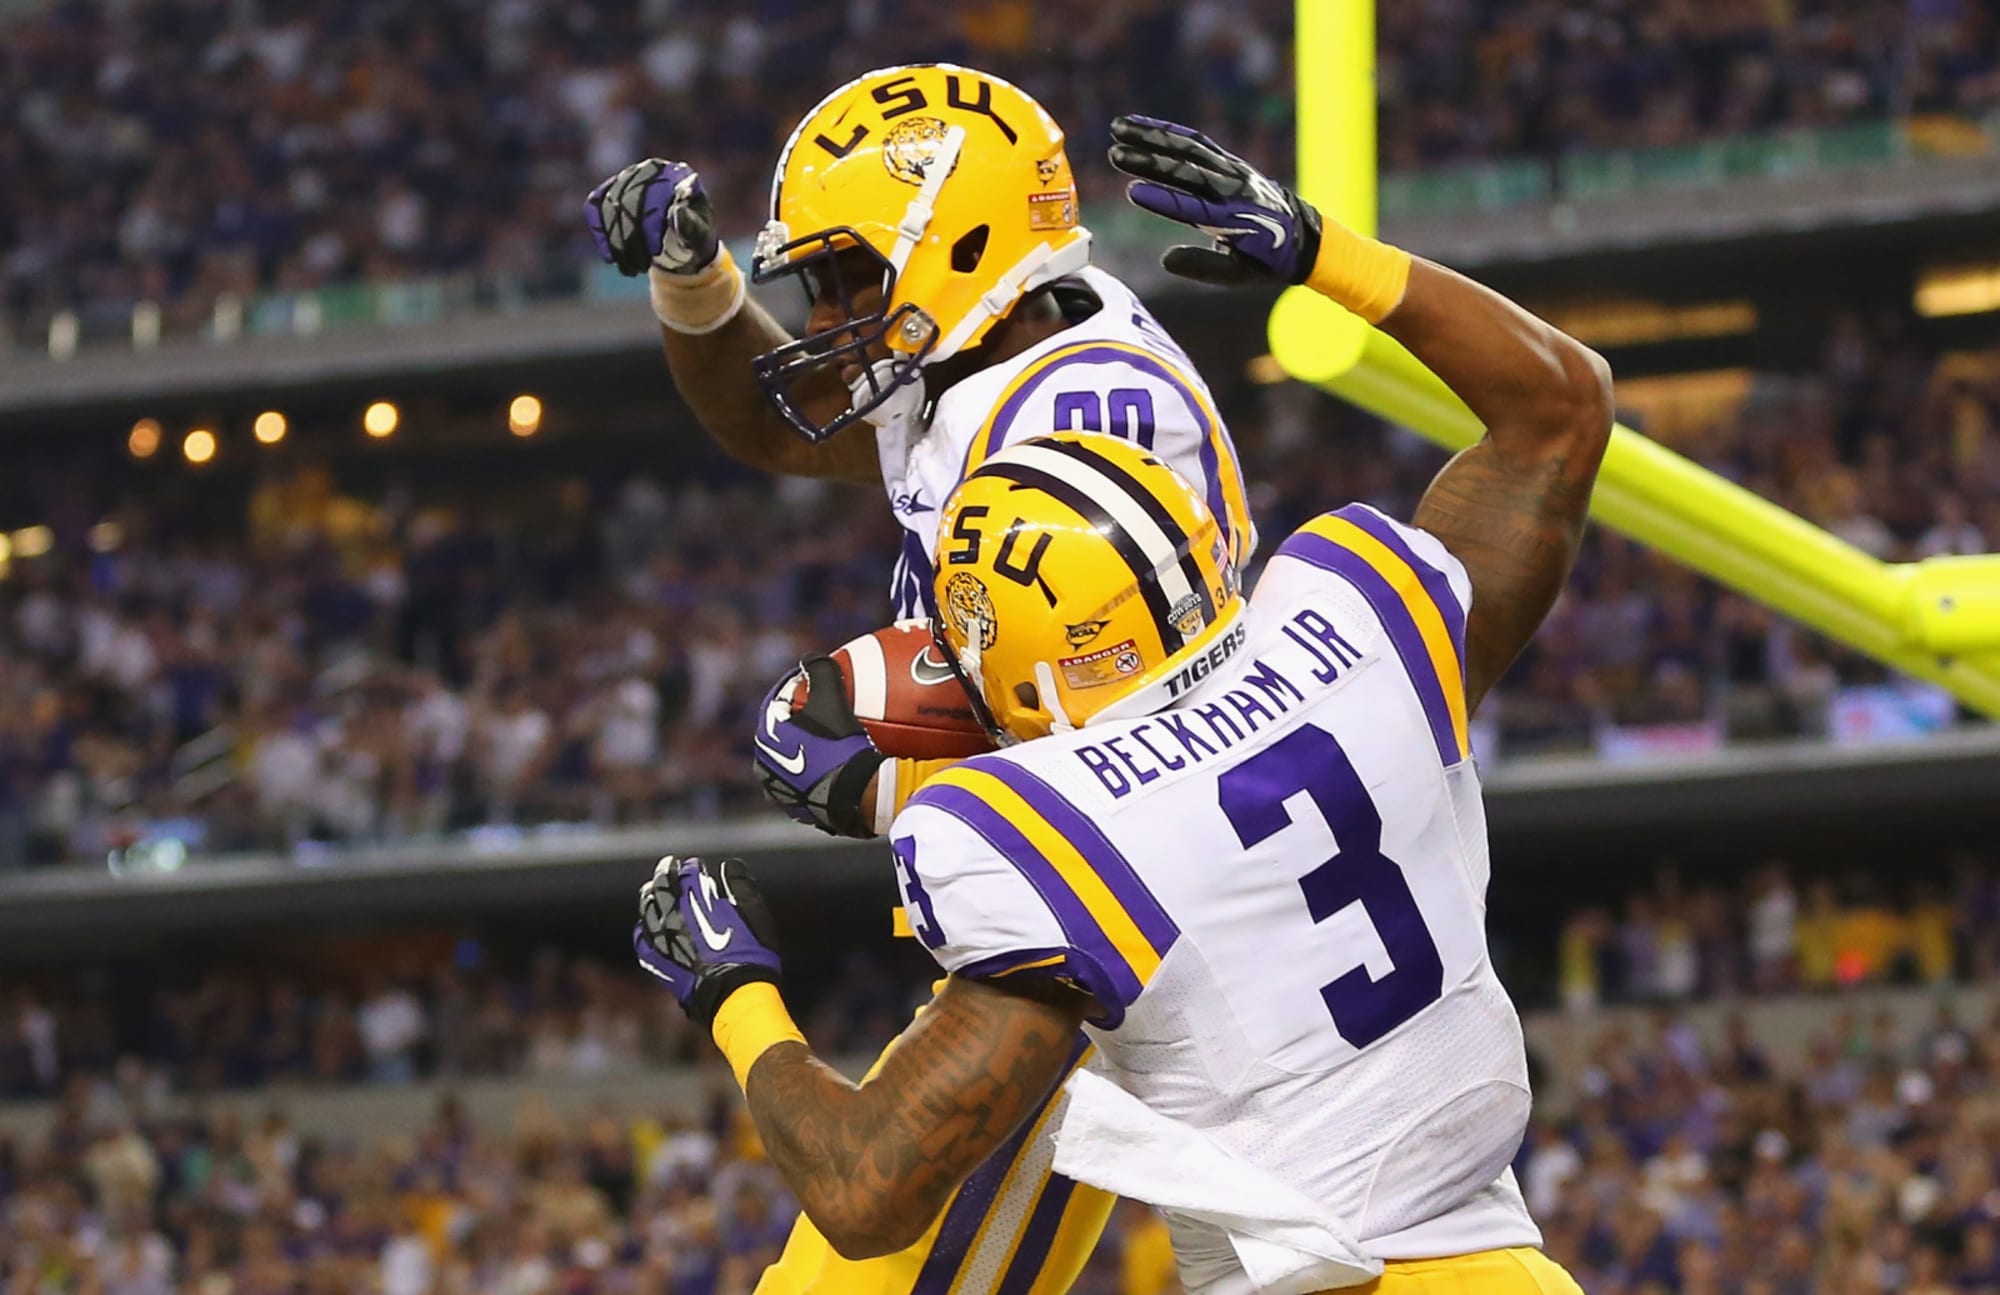 LSU boys Odell Beckham and Jarvis Landry reunited and it feels so good